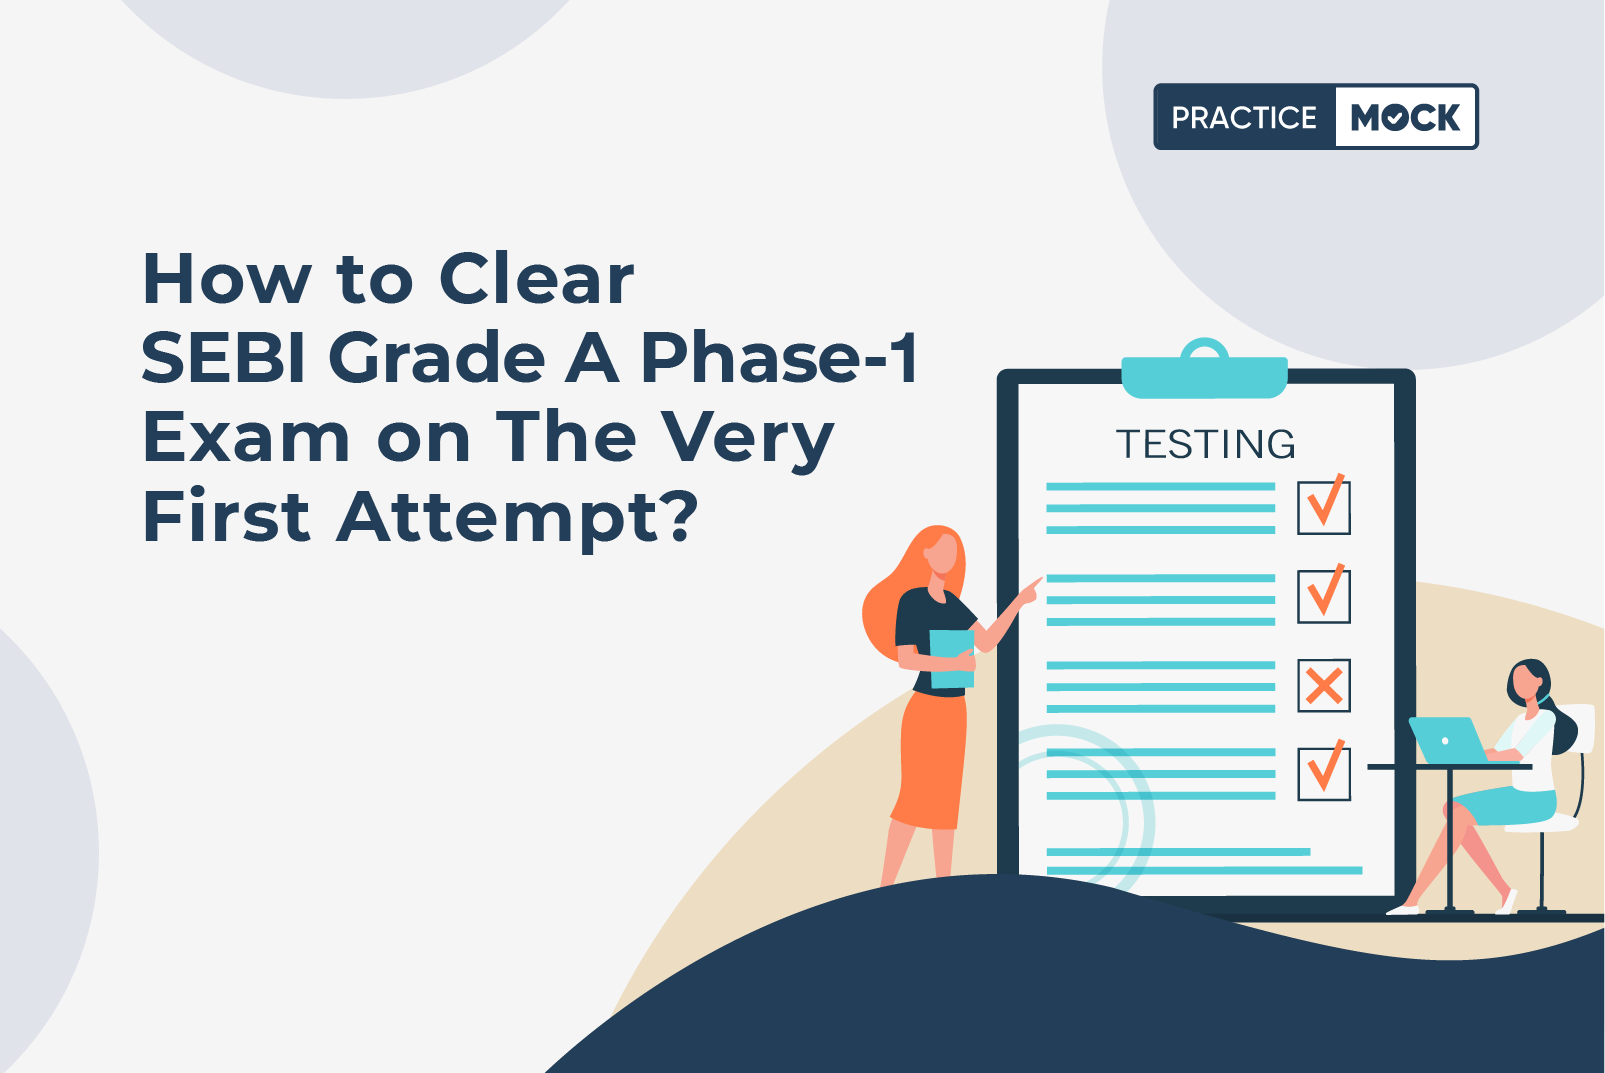 How to Clear SEBI Grade A Phase 1 Exam on the Very First Attempt?